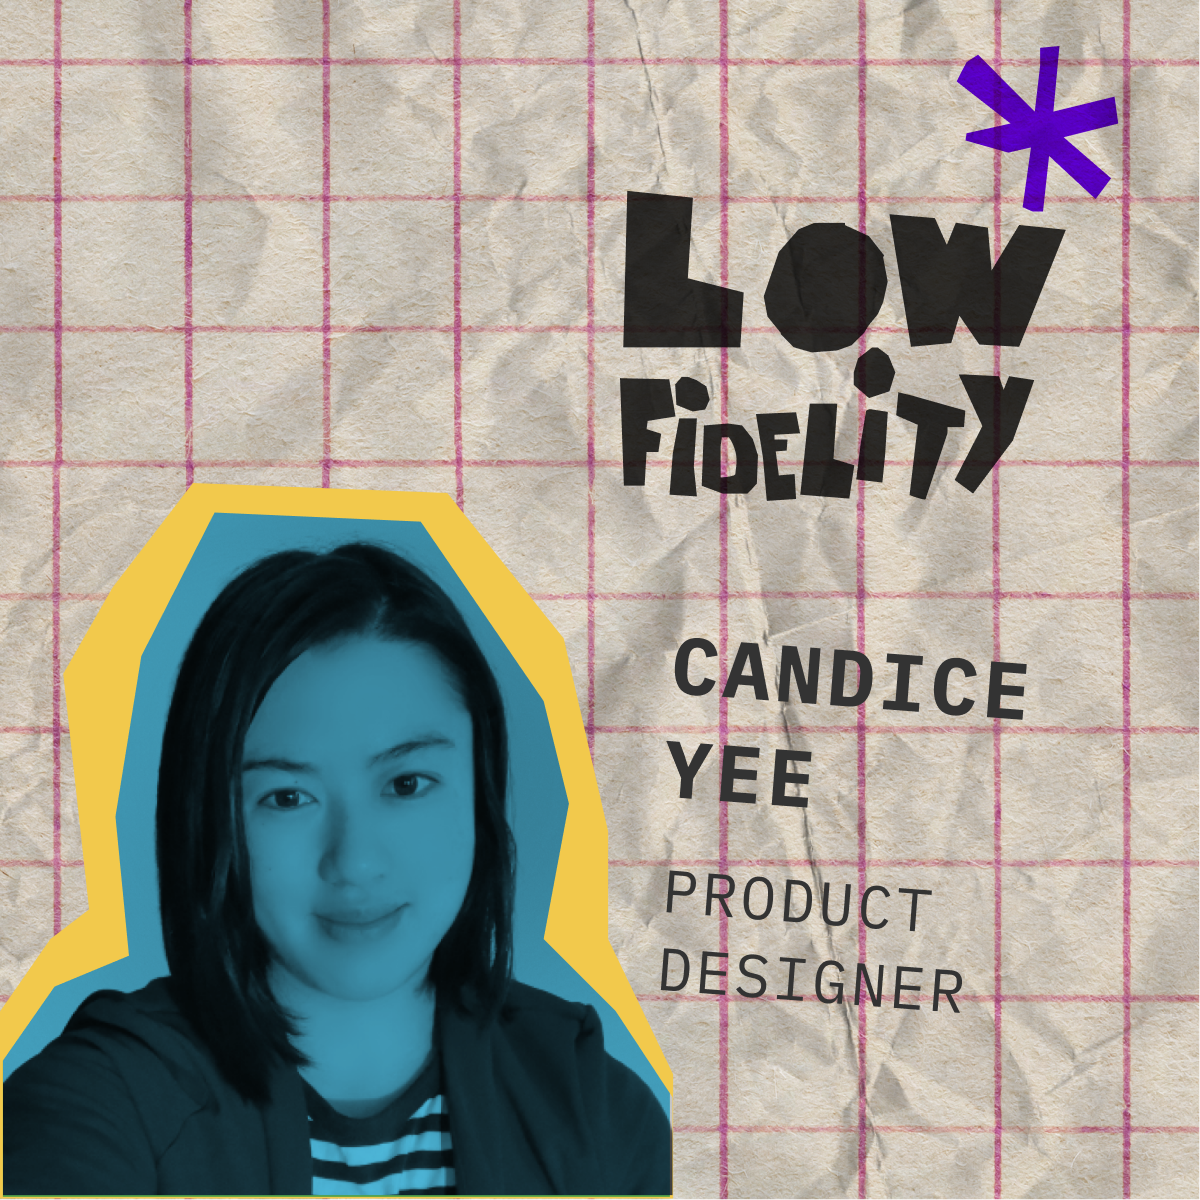 Photo of Candice Yee on the cover of the Low Fidelity podcast. with the words Low Fidelity and Candice Yee, Product Designer